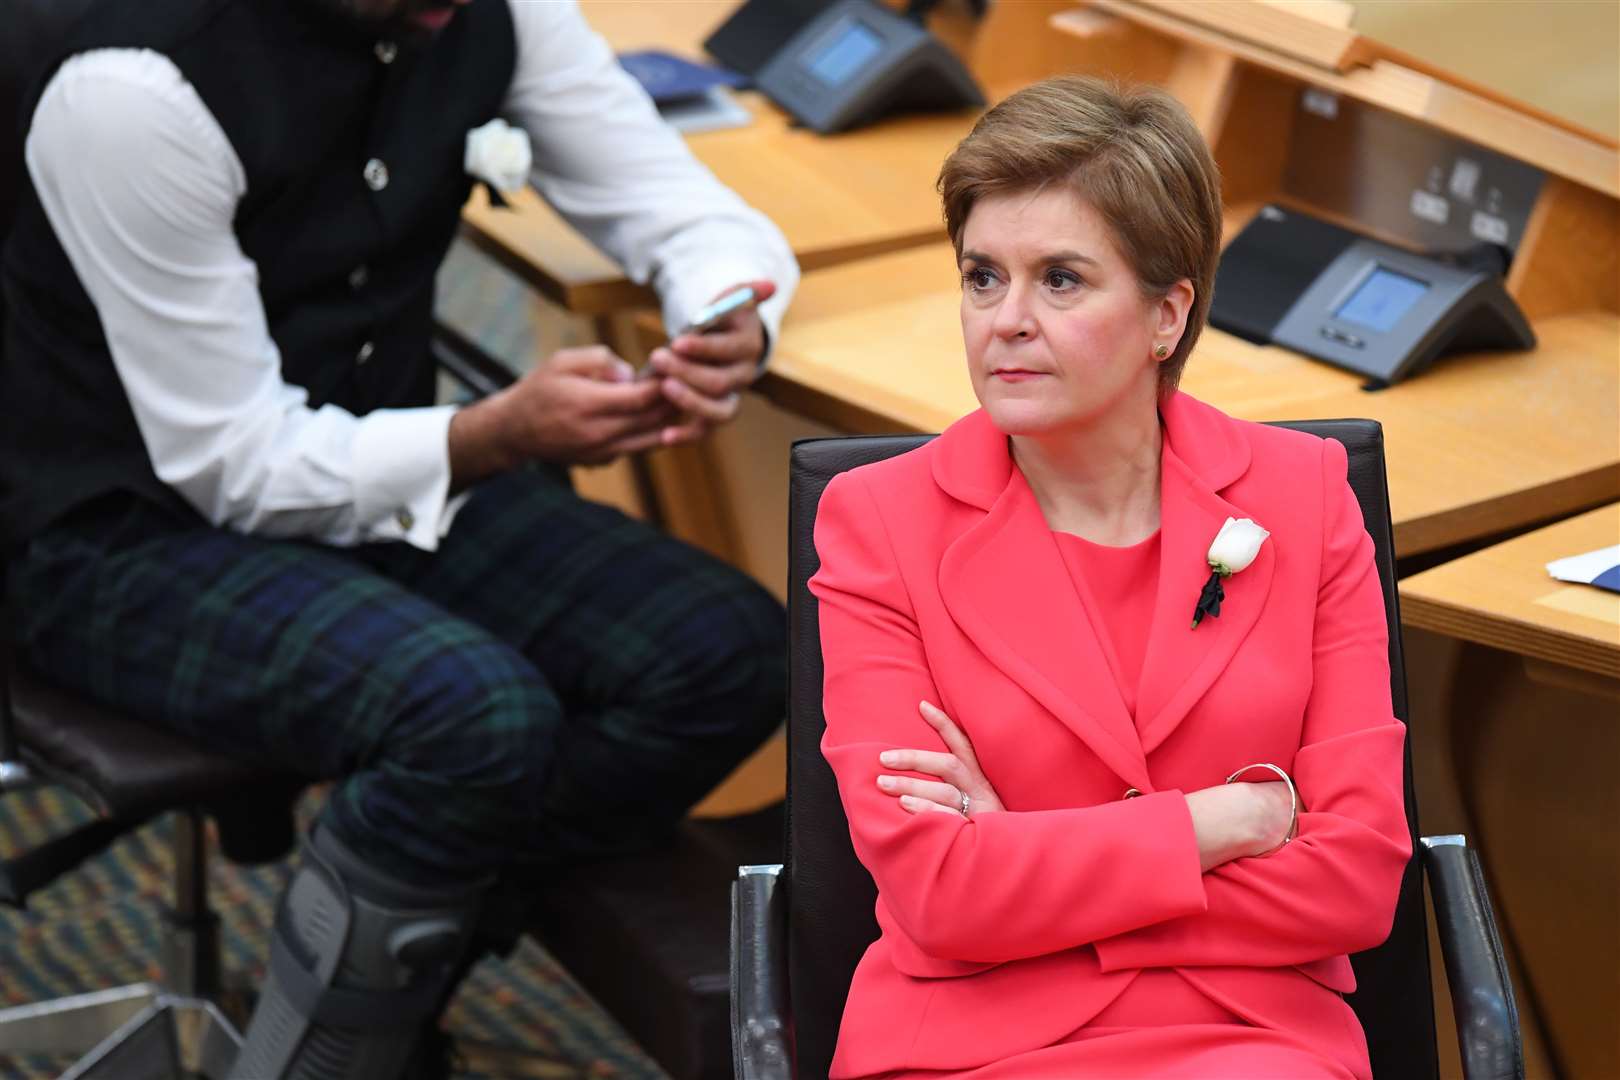 Nicola Sturgeon promised both a ‘catch-up plan’ to deal with missed emissions targets and a new energy strategy for Scotland (Andy Buchanan/PA)